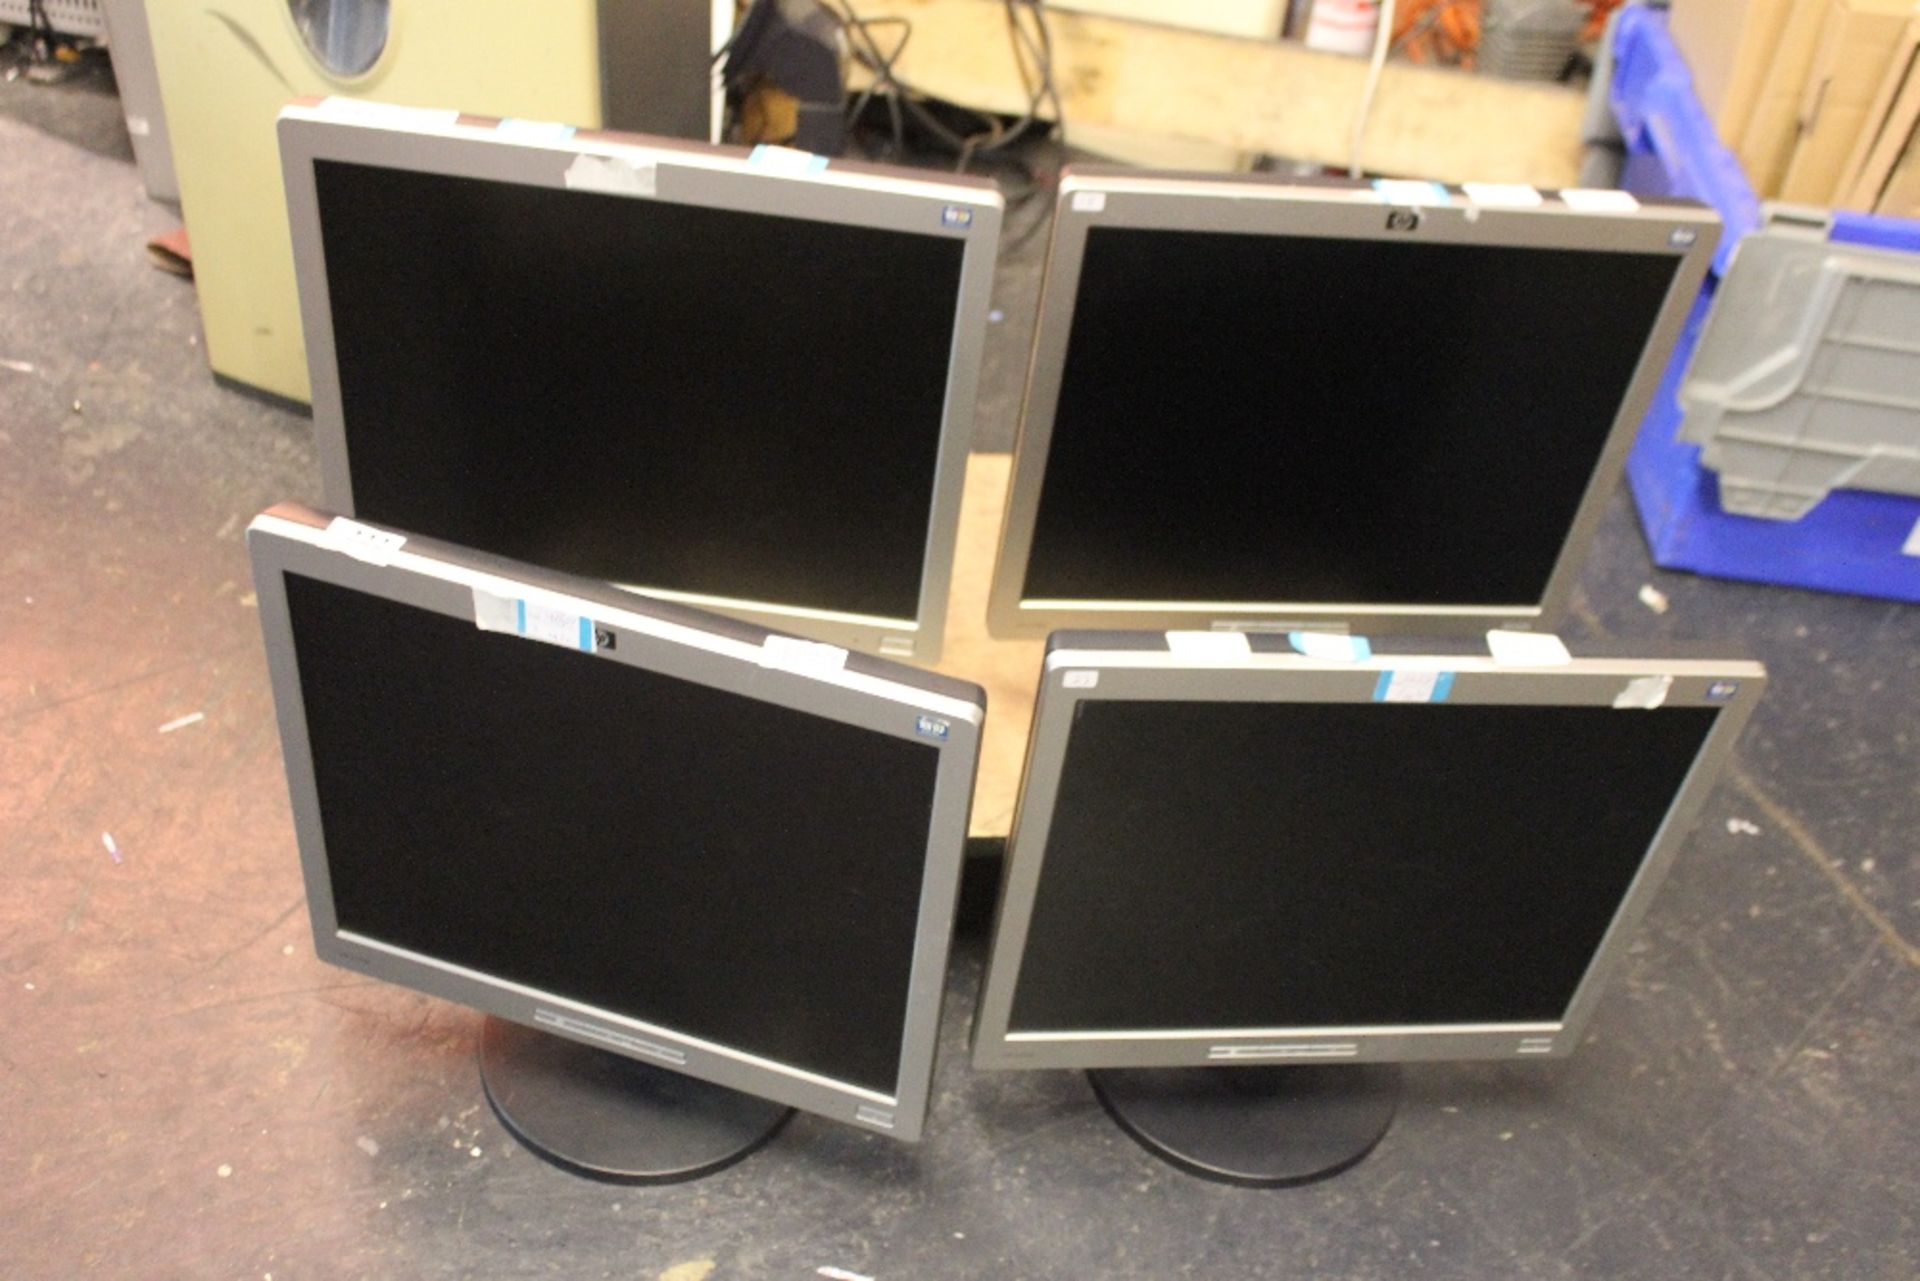 4X HP L1706 TFT Monitor - All power on and display okay